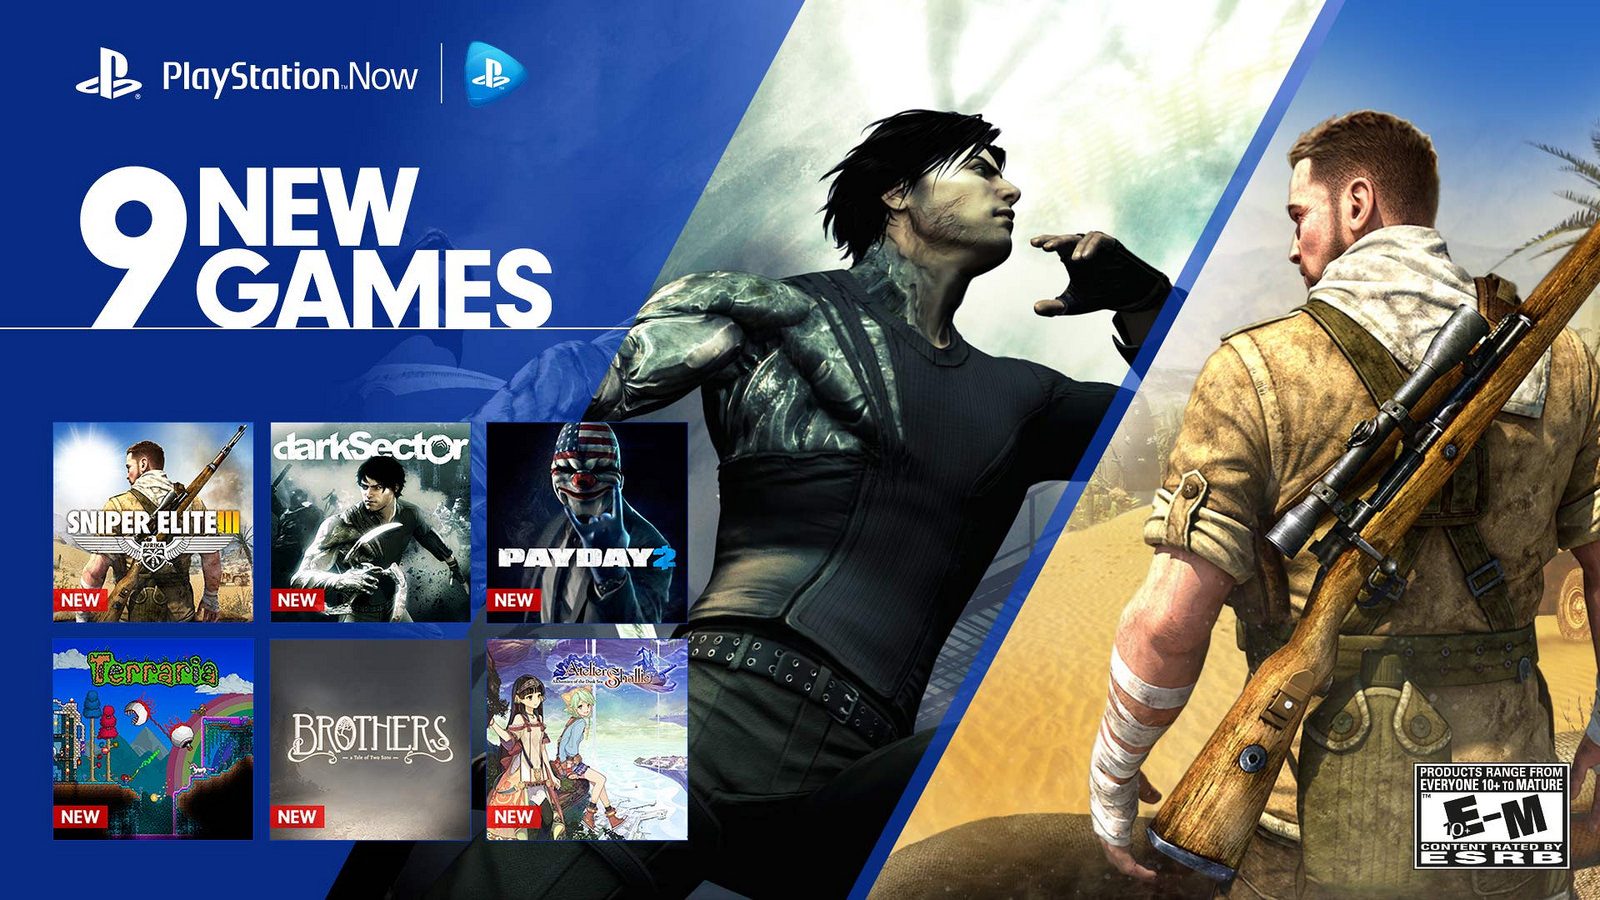 They play games now. PLAYSTATION 9. PS New games. Play Now игра. Гейм New.